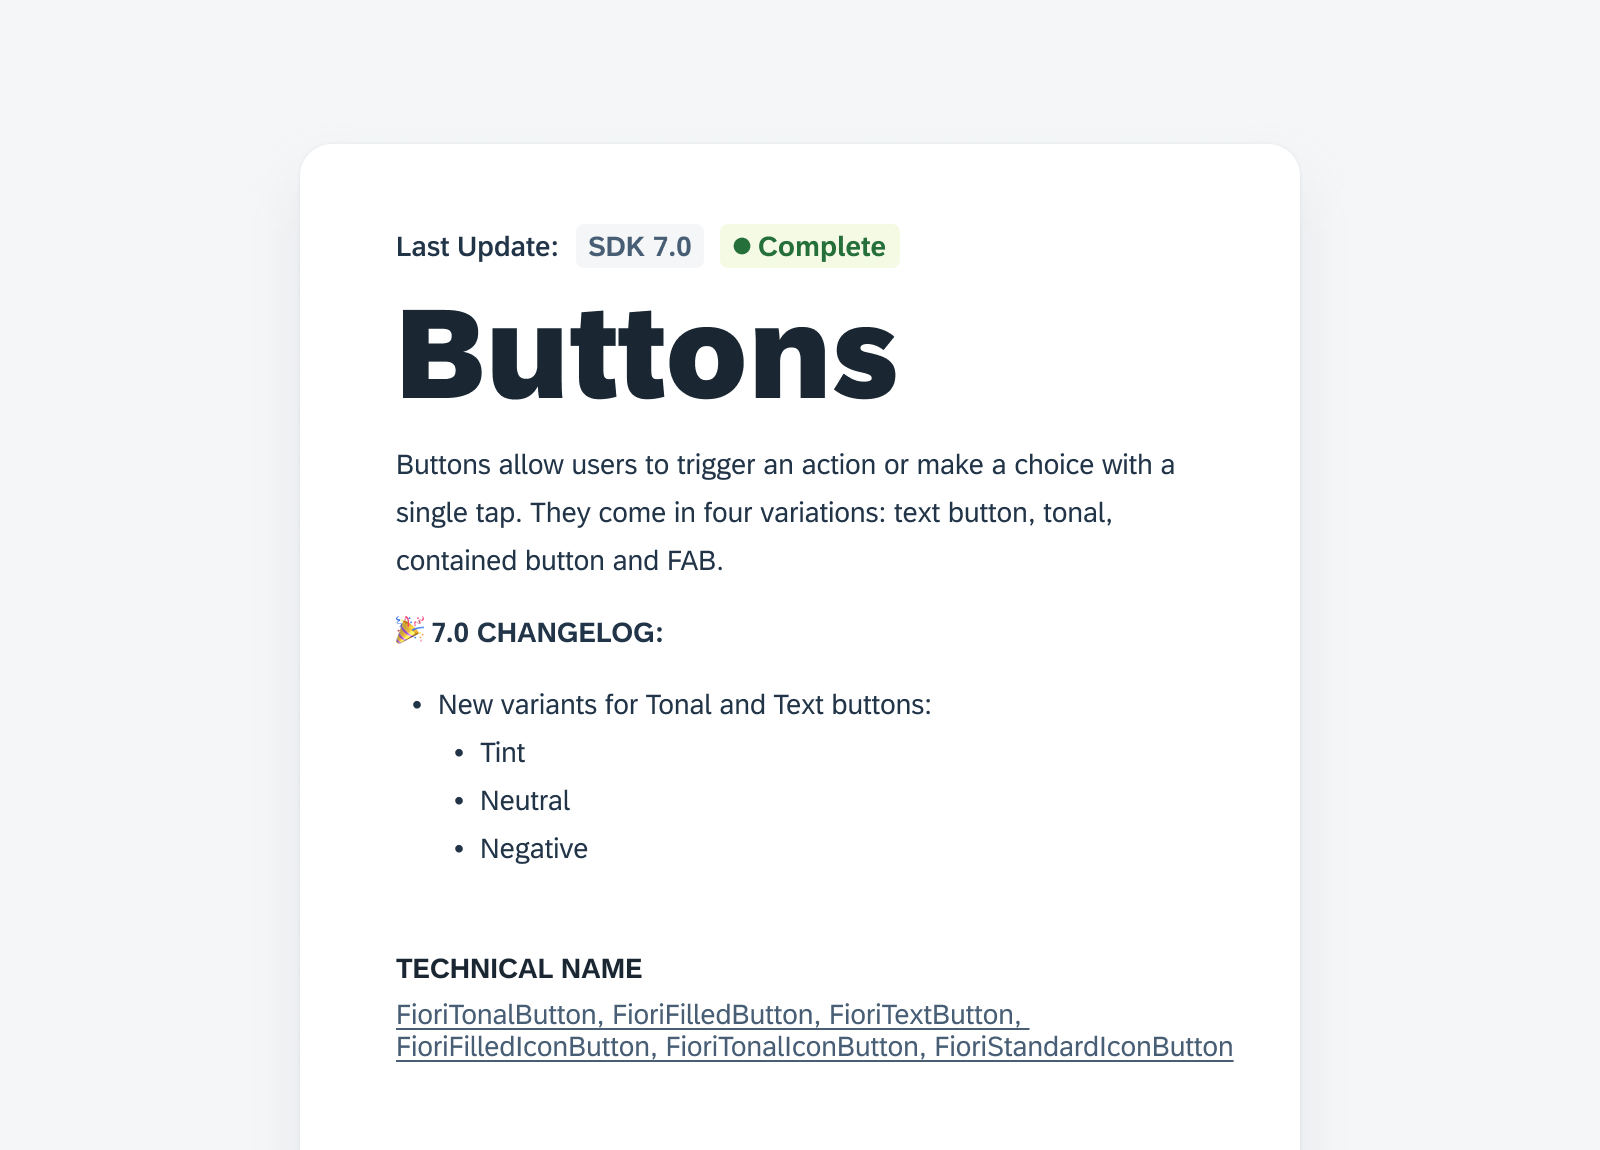 Info card for Buttons with added technical names 